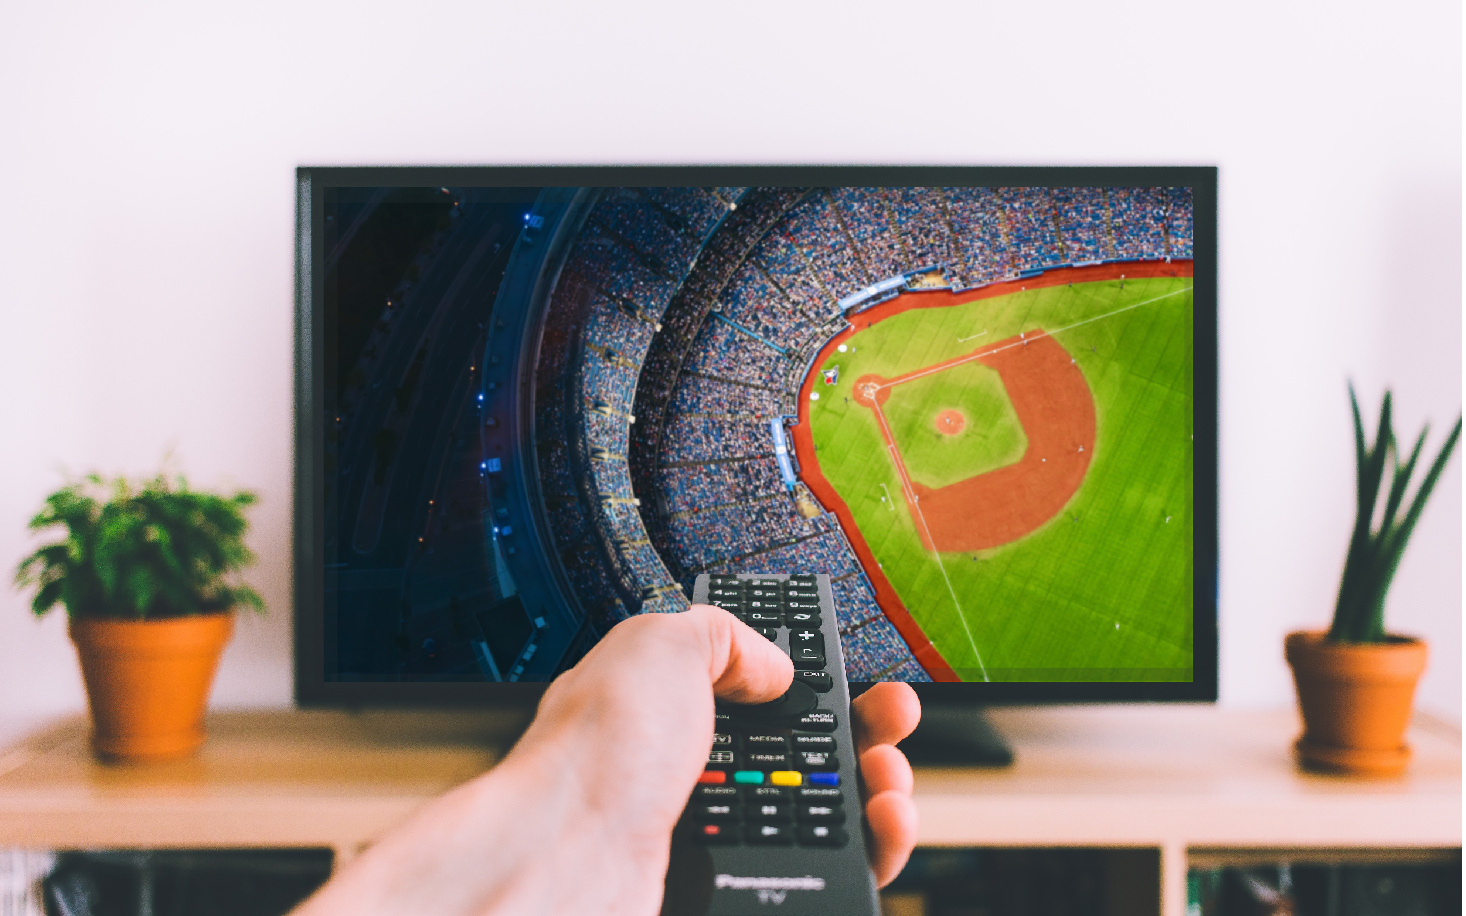 man holding a remote control while watching the baseball game